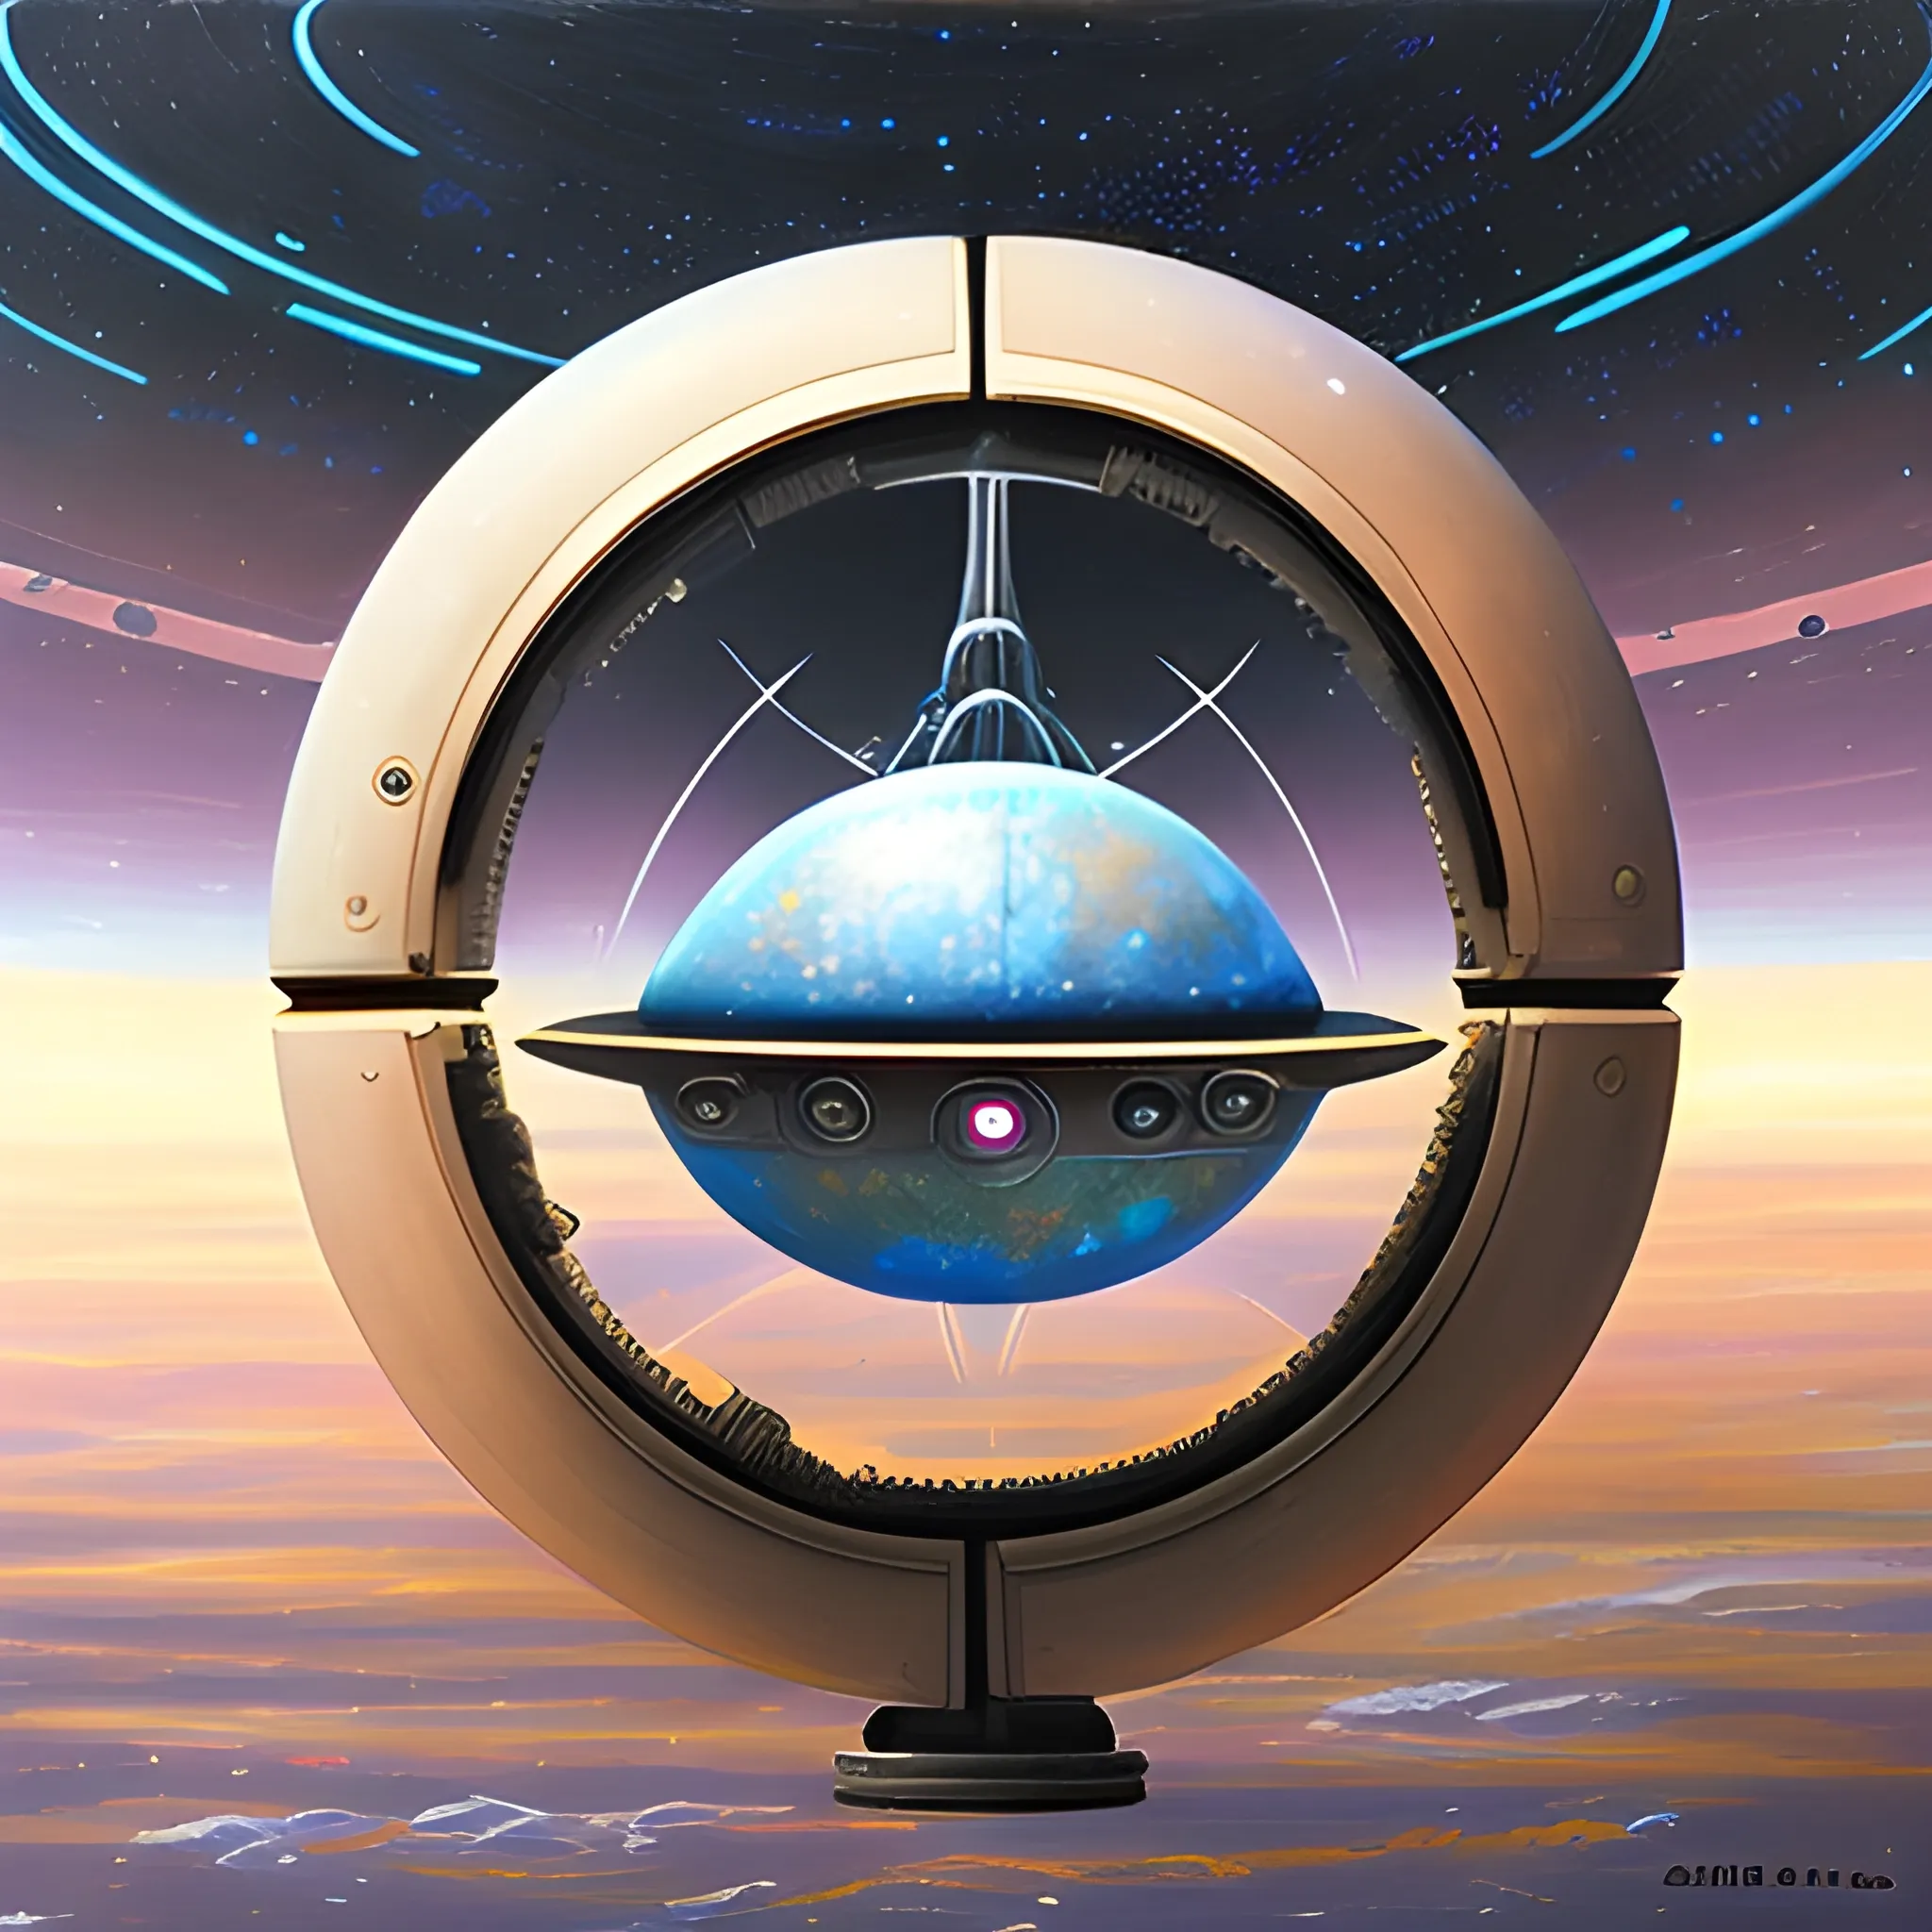 advanced world, technology, science, circle spaceship, Oil Painting